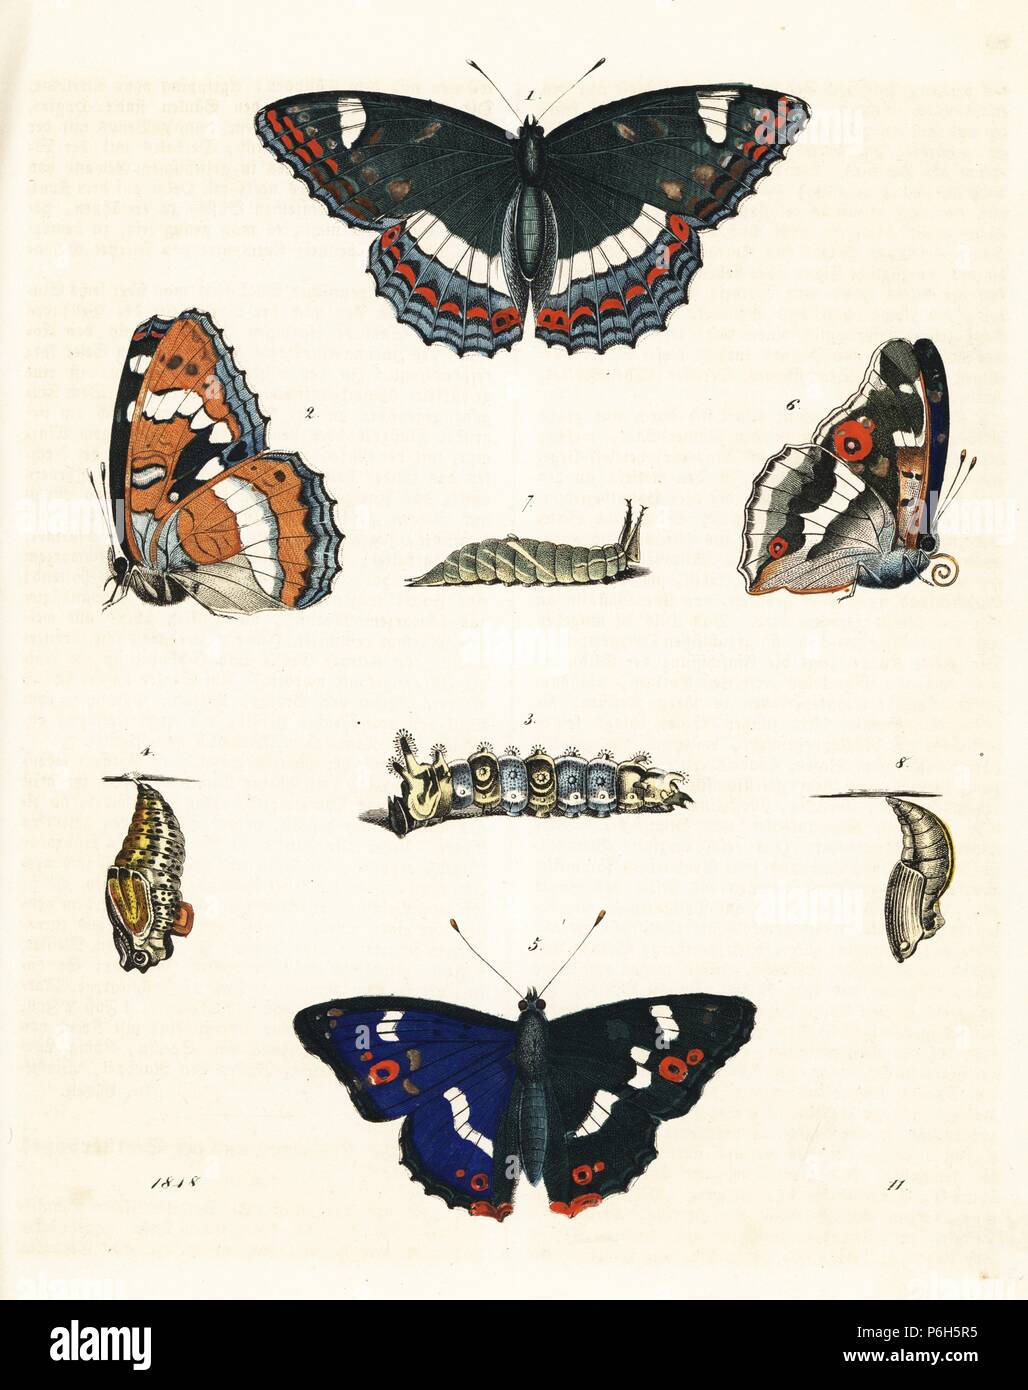 Poplar admiral butterfly, Limenitis populi, 1,2,3,4, and purple emperor, Apatura iris 5,6,7,8, with caterpillar and pupa. Handcoloured lithograph from Carl Hoffmann's Book of the World, Stuttgart, 1848. Stock Photo